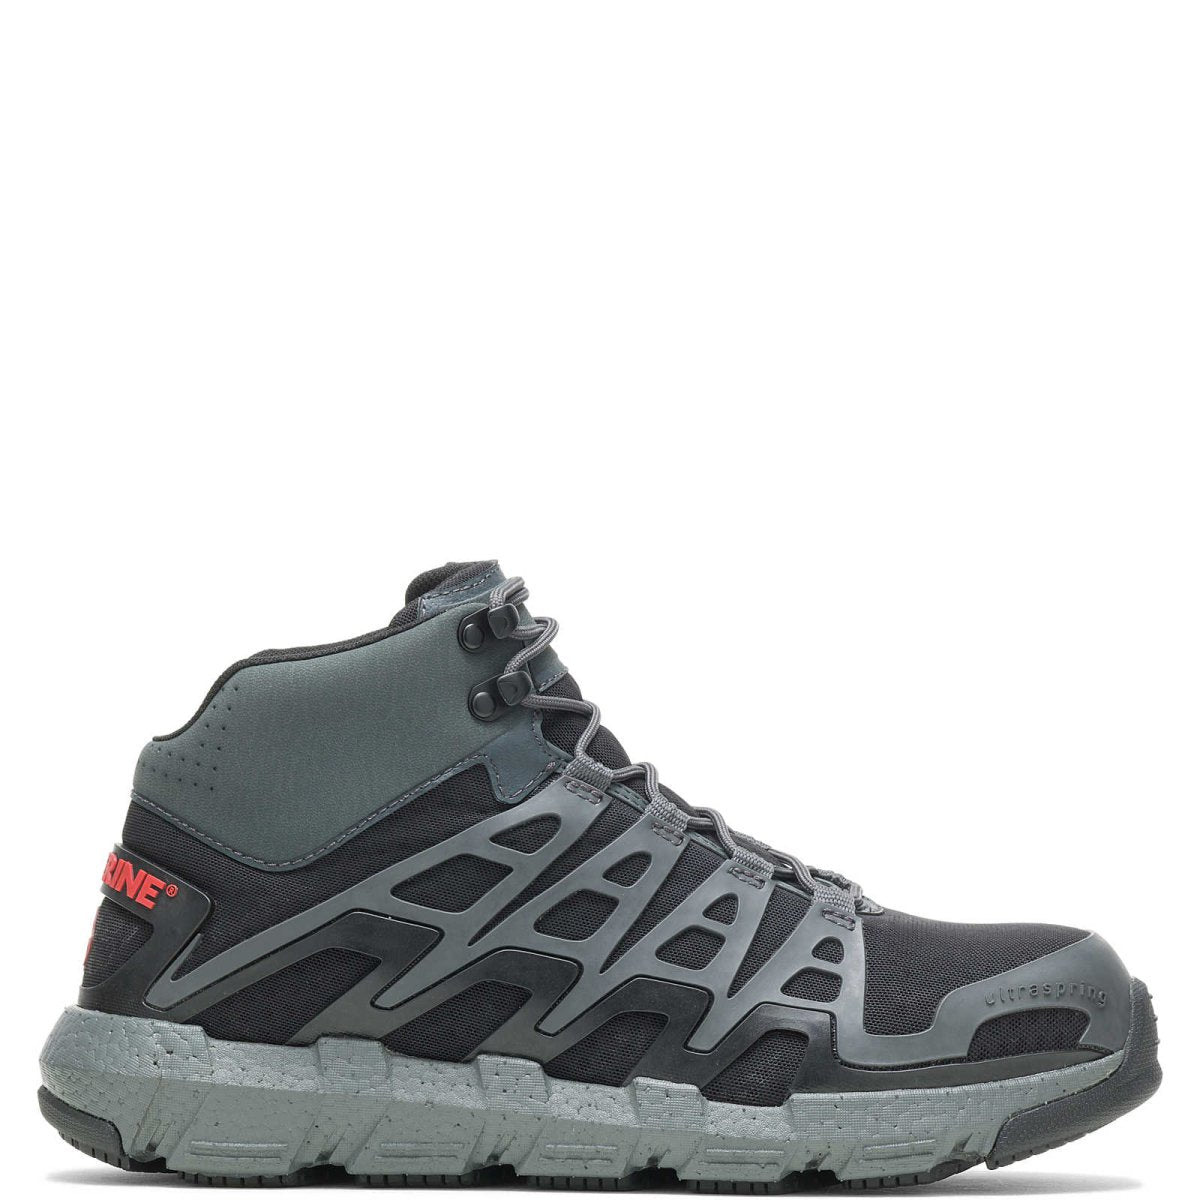 WOLVERINE MEN'S REV VENT ULTRASPRING DURASHOCKS CARBONMAX WORK BOOT (W211018) IN CHARCOAL - TLW Shoes